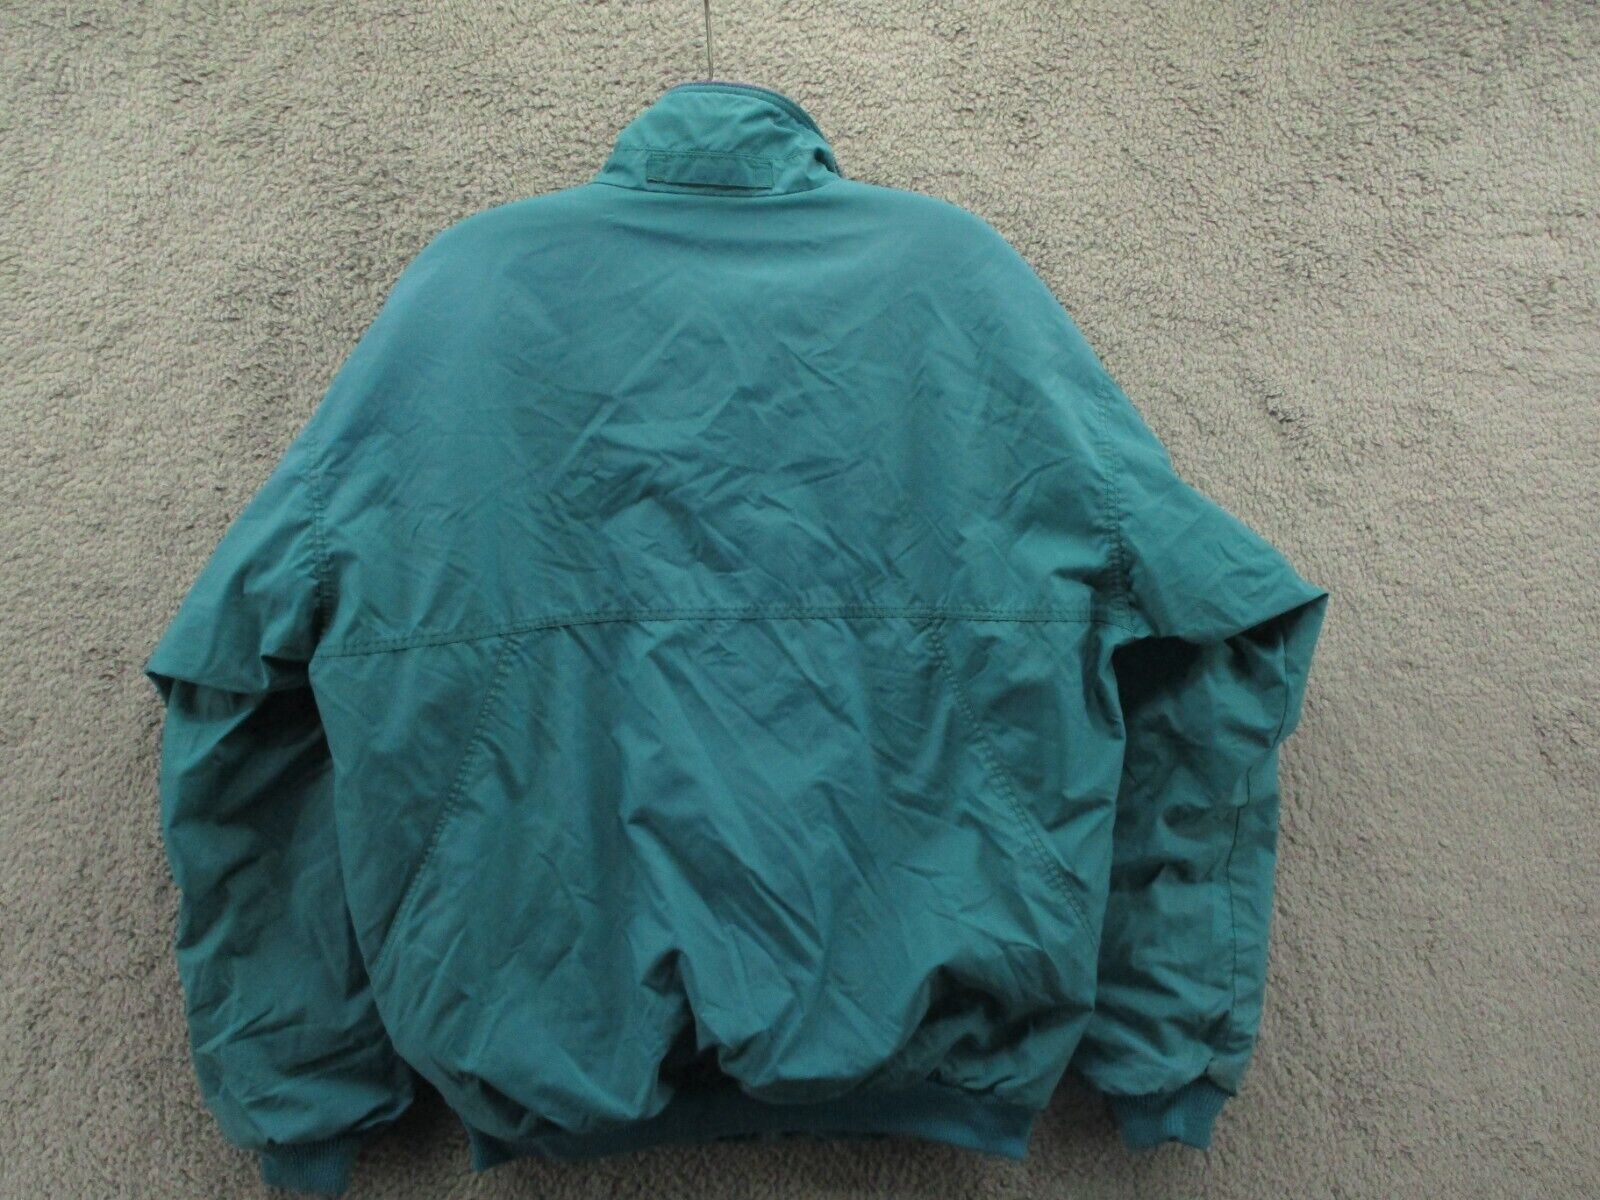 Vintage 90s Patagonia Jacket Teal Fleece Lined *Stained* USA Made Womens  Size 14